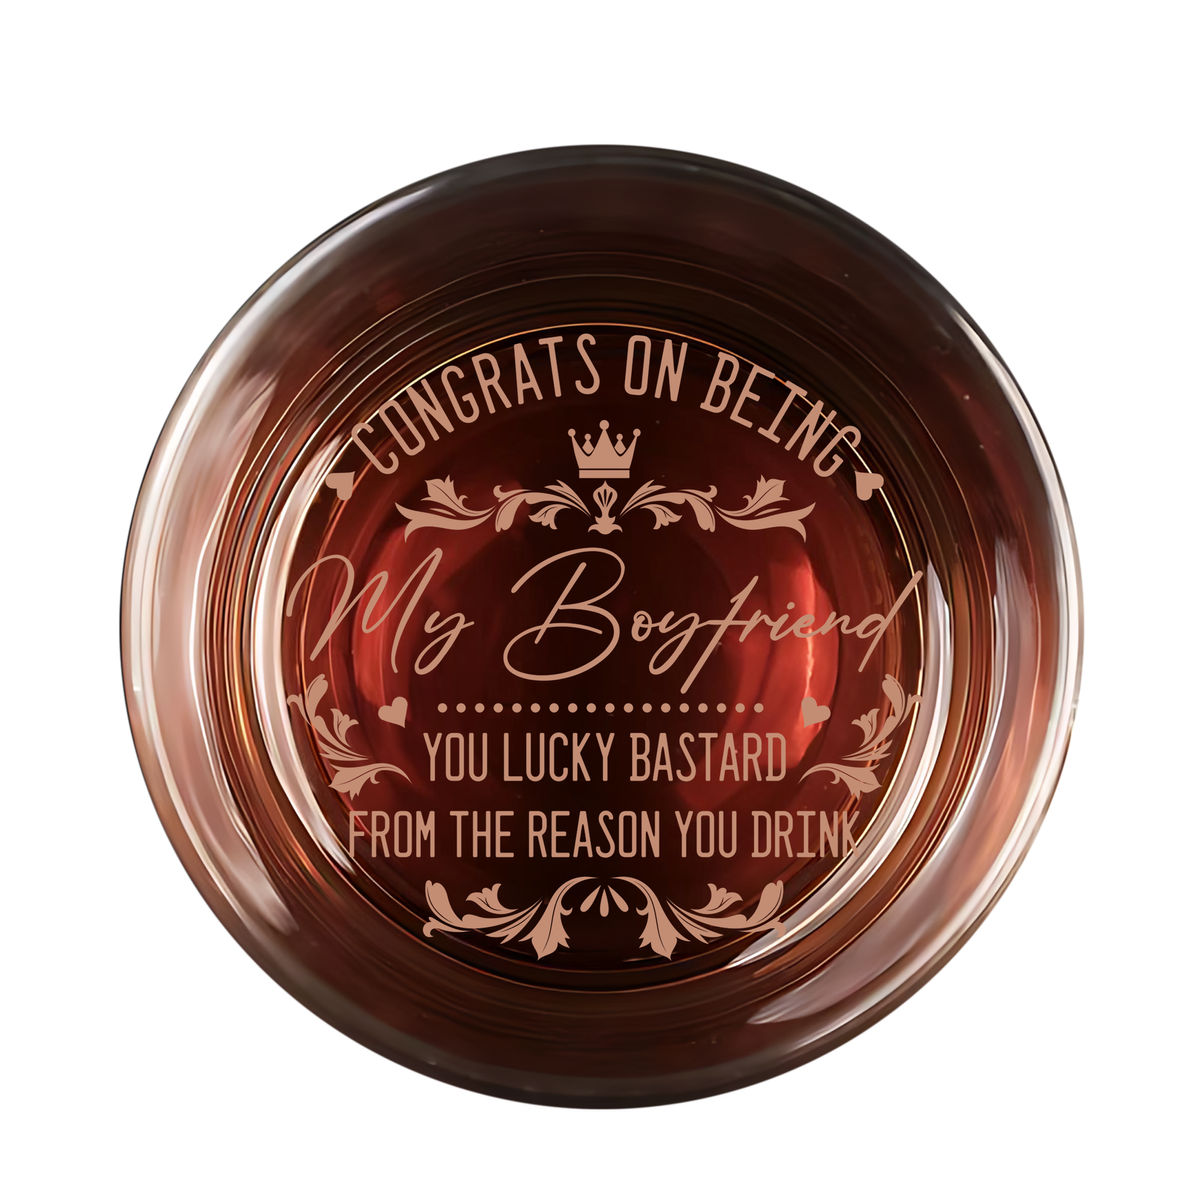 Couple Gifts - Congrats on being my Boyfriend. You lucky bastard from the reason you  drink. - Gifts For Dad, Husband, Boyfriend... - Gifts For Father's Day, Birthday, Anniversary - Personalize Whiskey Glass